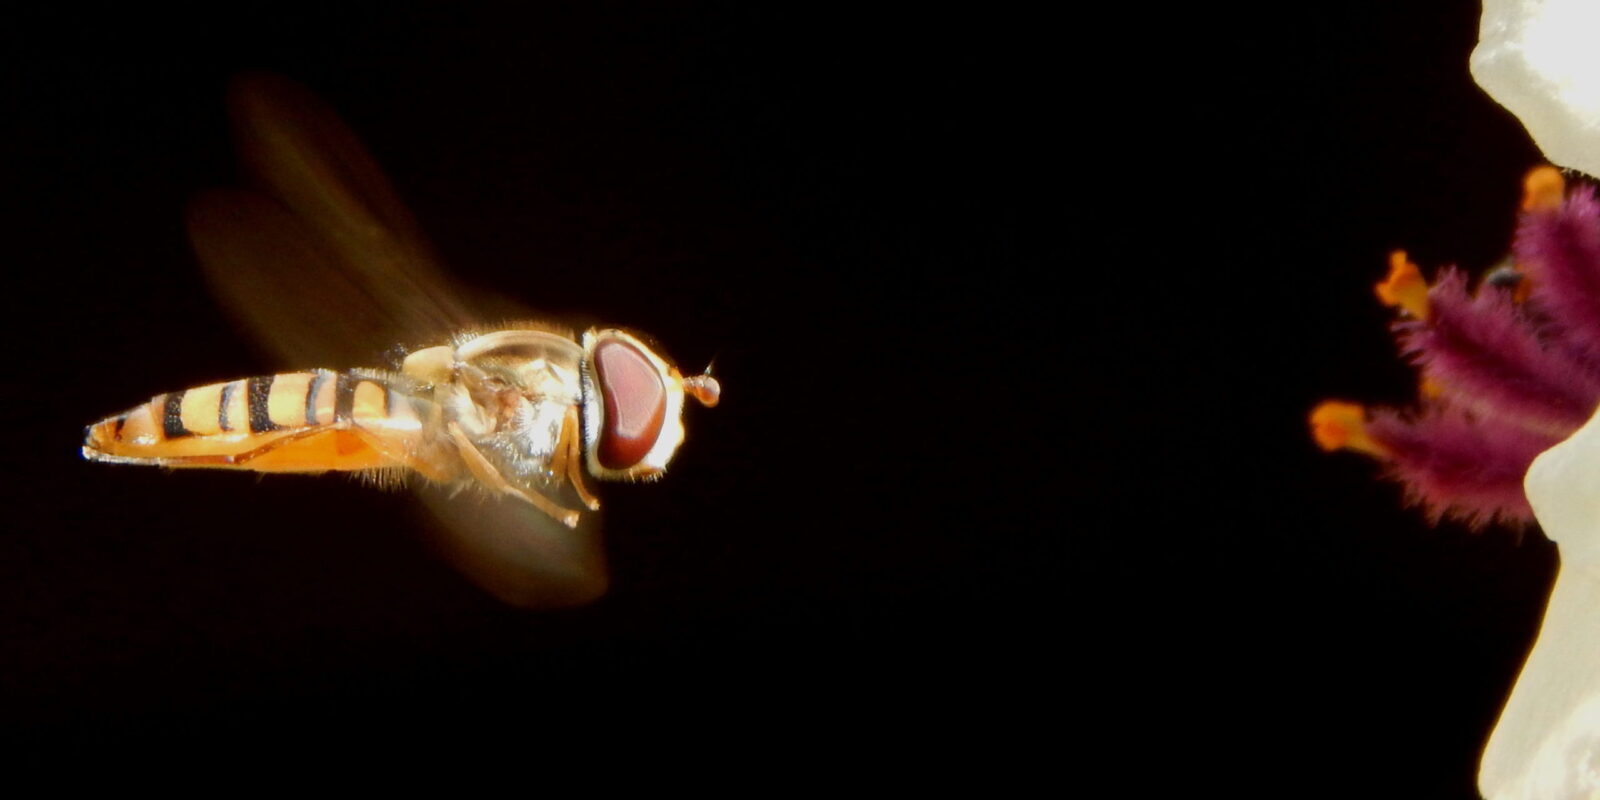 Hoverfly honing in Credit Zach Haynes